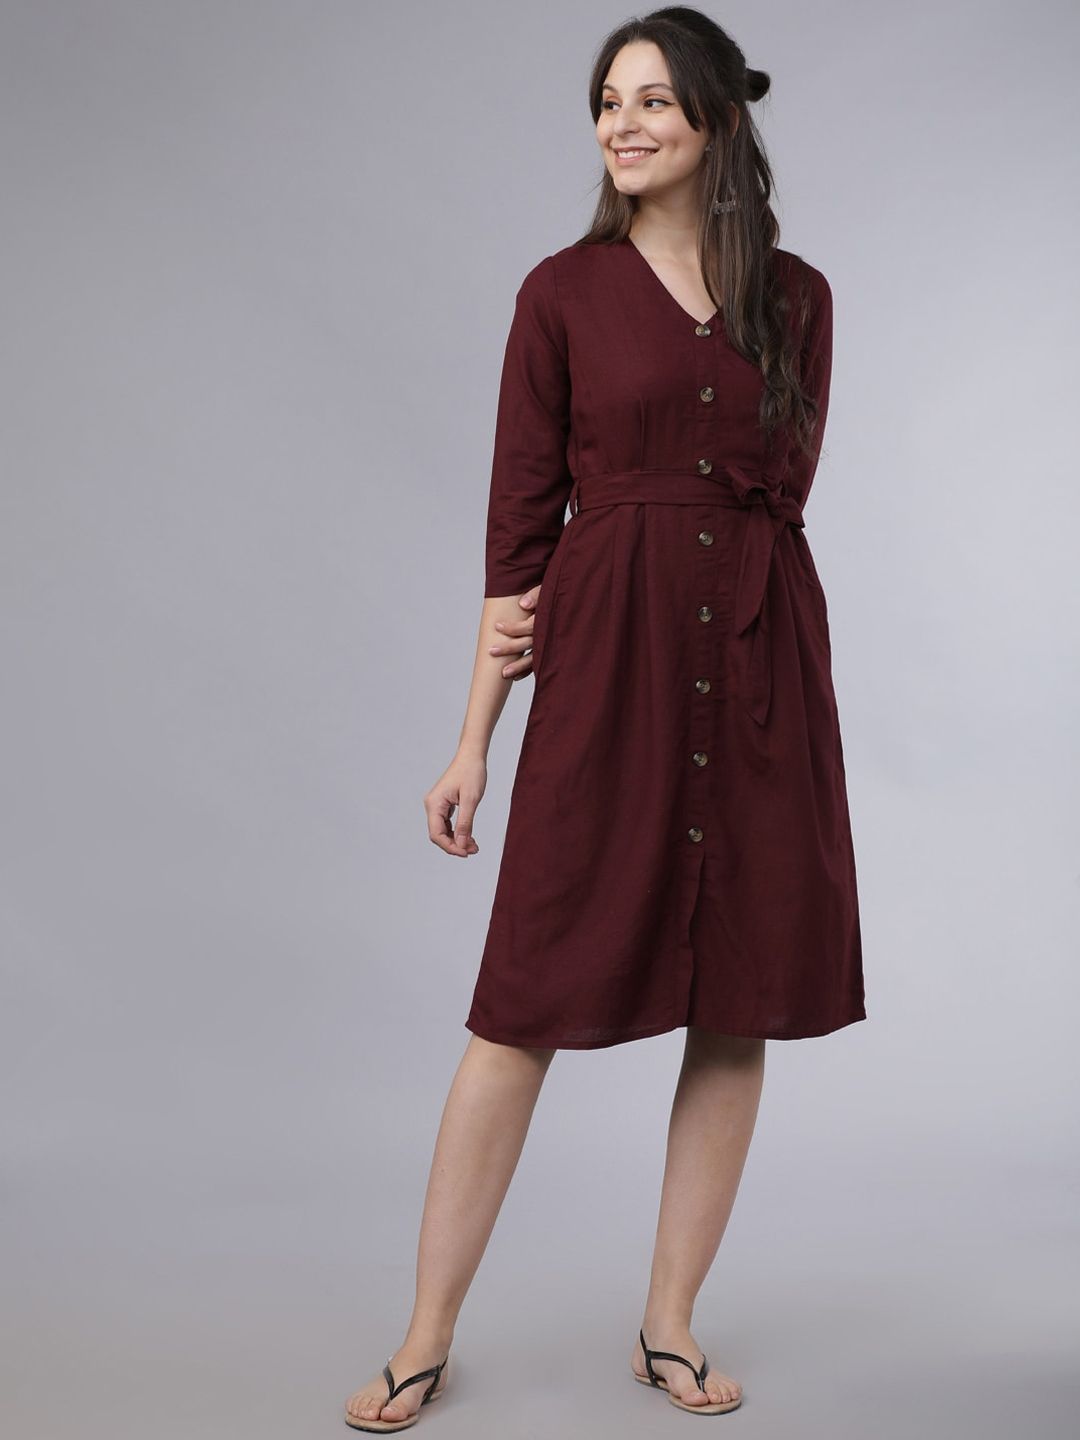 Tokyo Talkies Women Burgundy Solid A-Line Dress Price in India